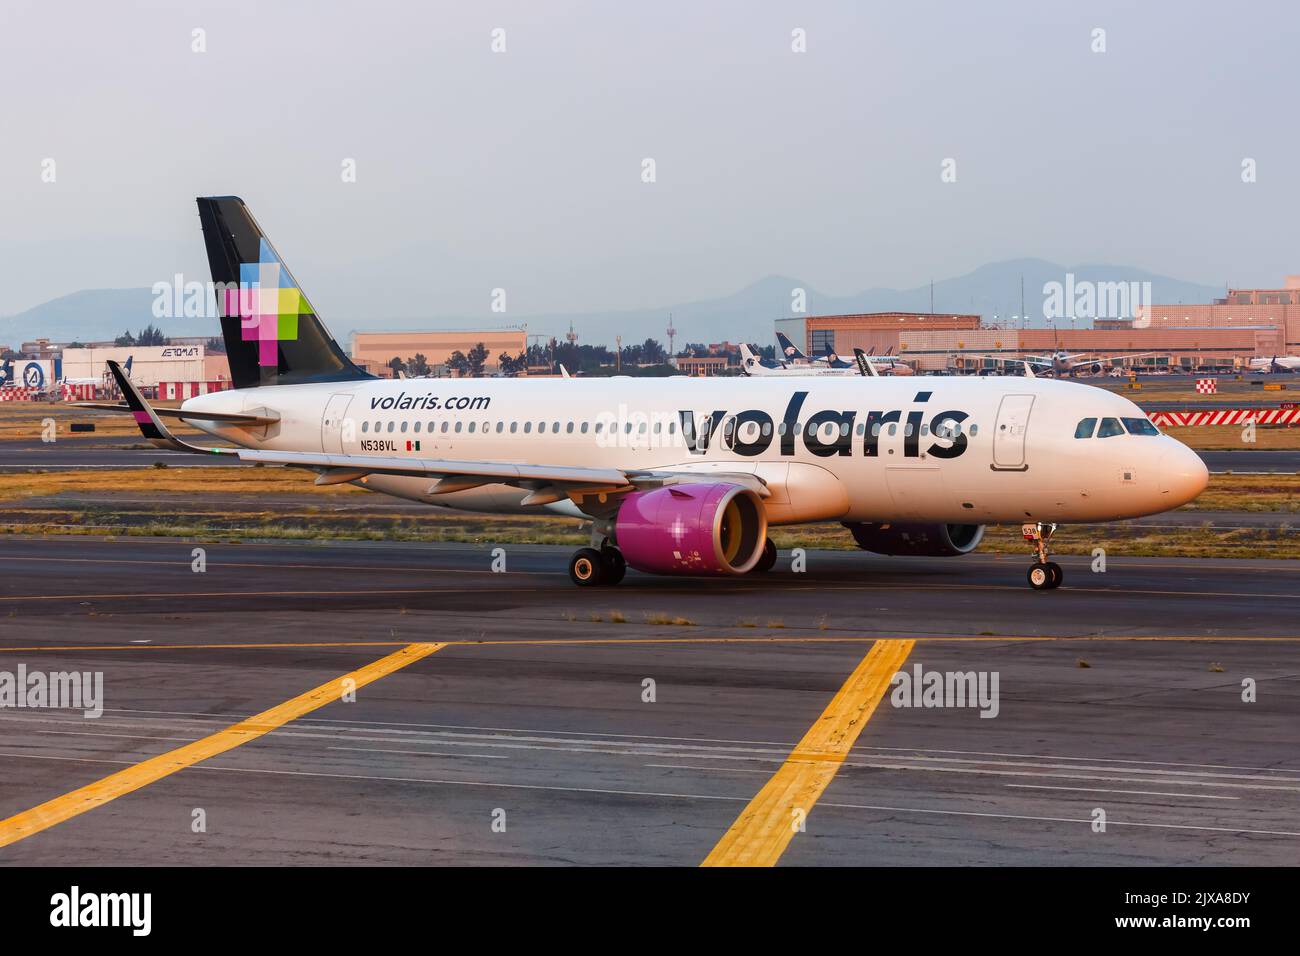 Mexico City, Mexico - April 15, 2022: Volaris Airbus A320neo airplane at Mexico City airport (MEX) in Mexico. Stock Photo